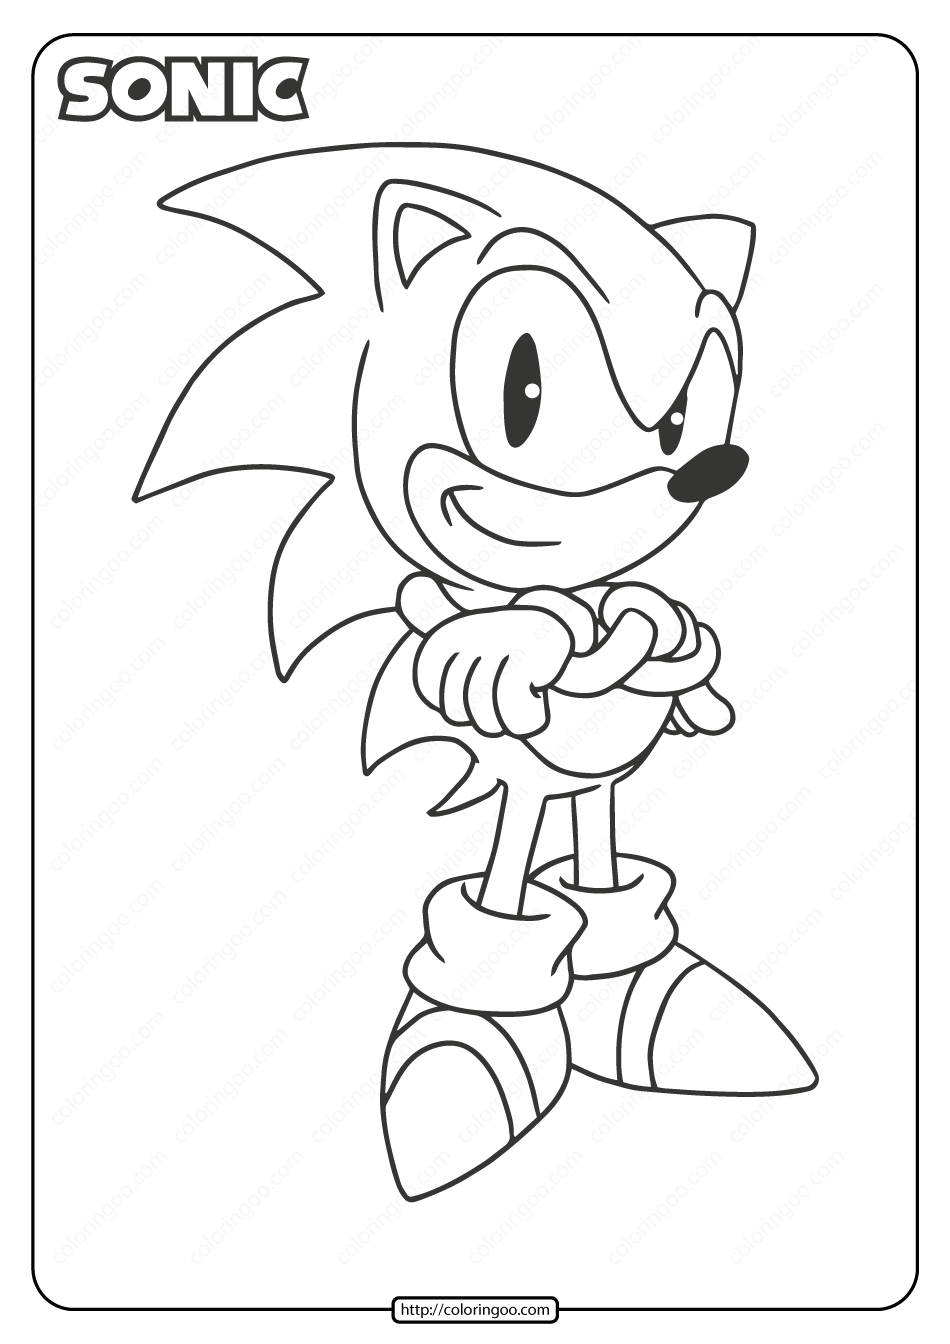 printable sonic the hedgehog pdf coloring page